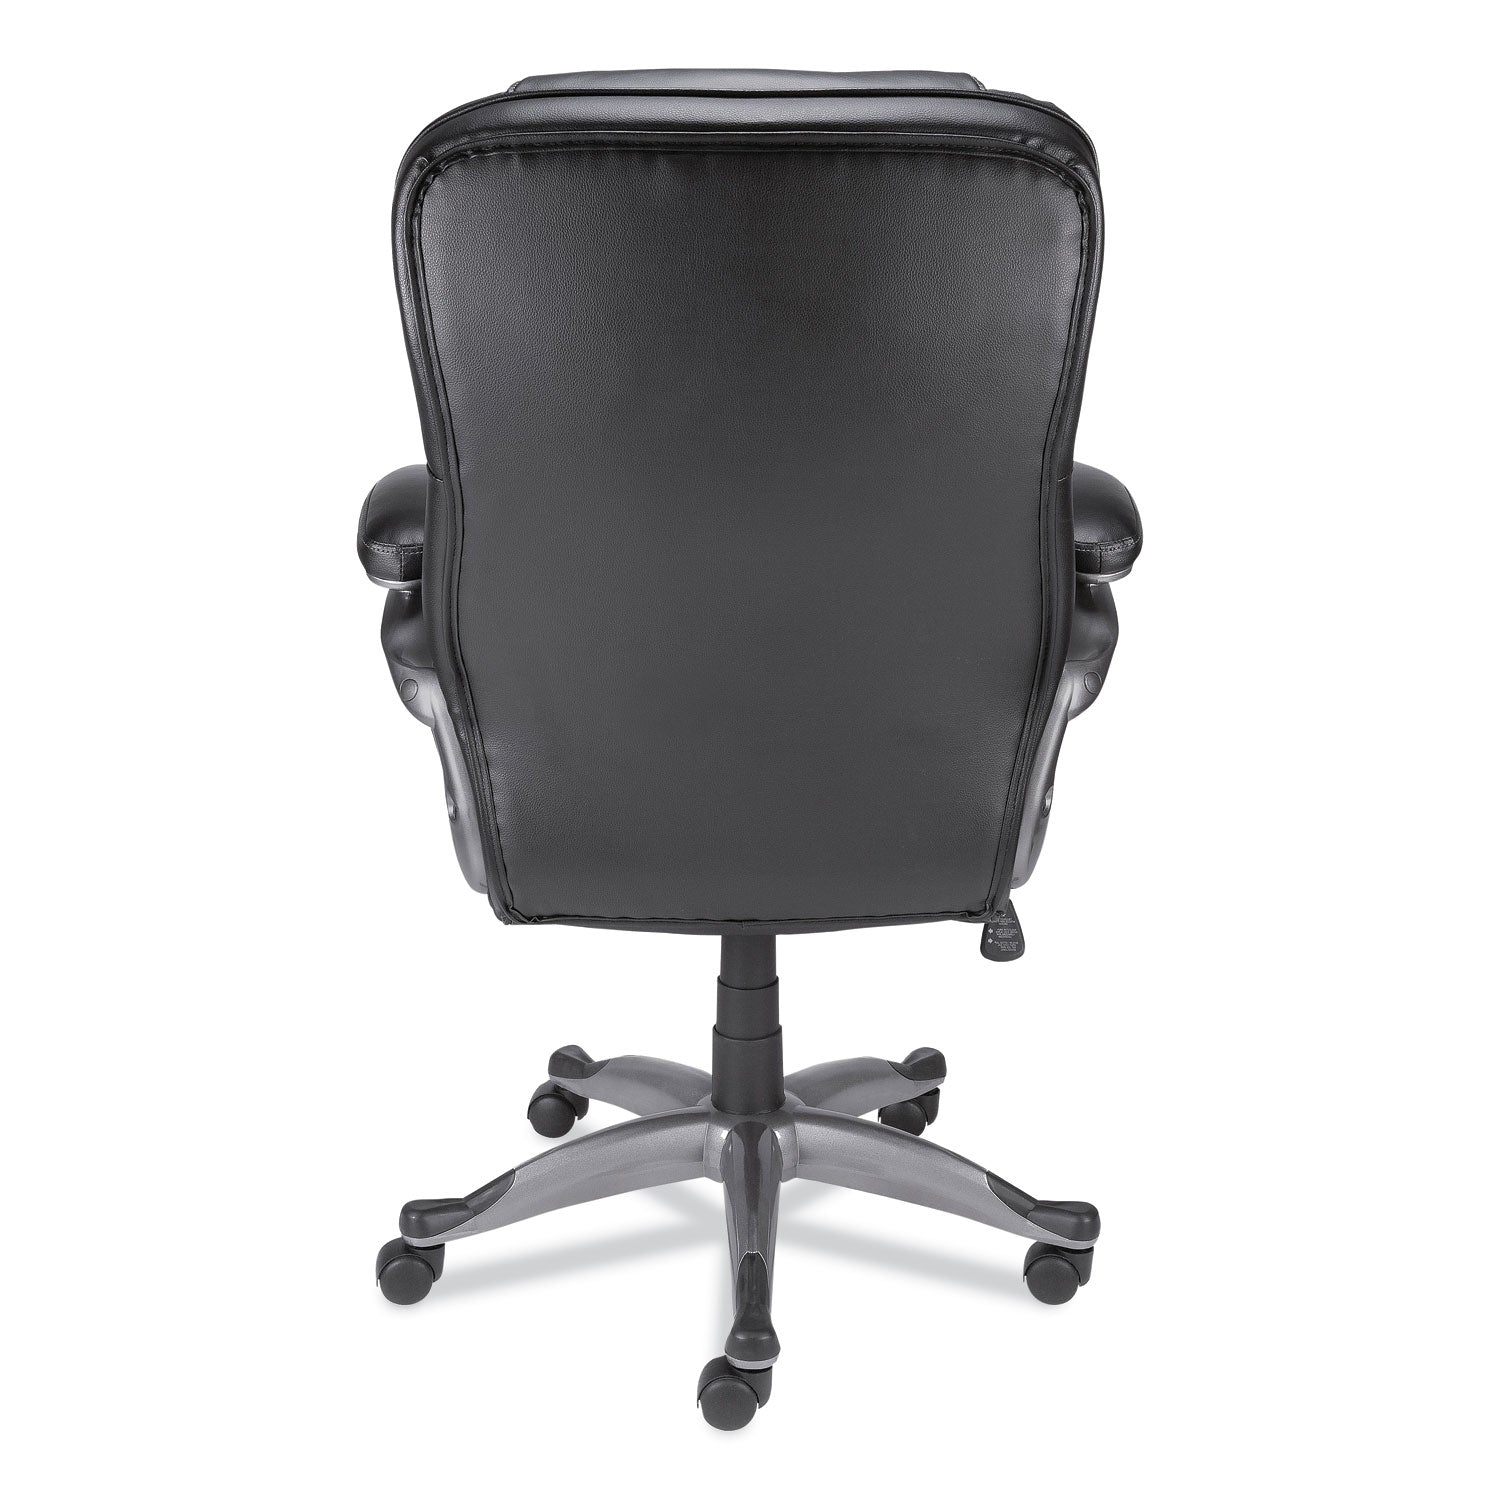 alera-birns-series-high-back-task-chair-supports-up-to-250-lb-1811-to-2205-seat-height-black-seat-back-chrome-base_alebn41b19 - 5